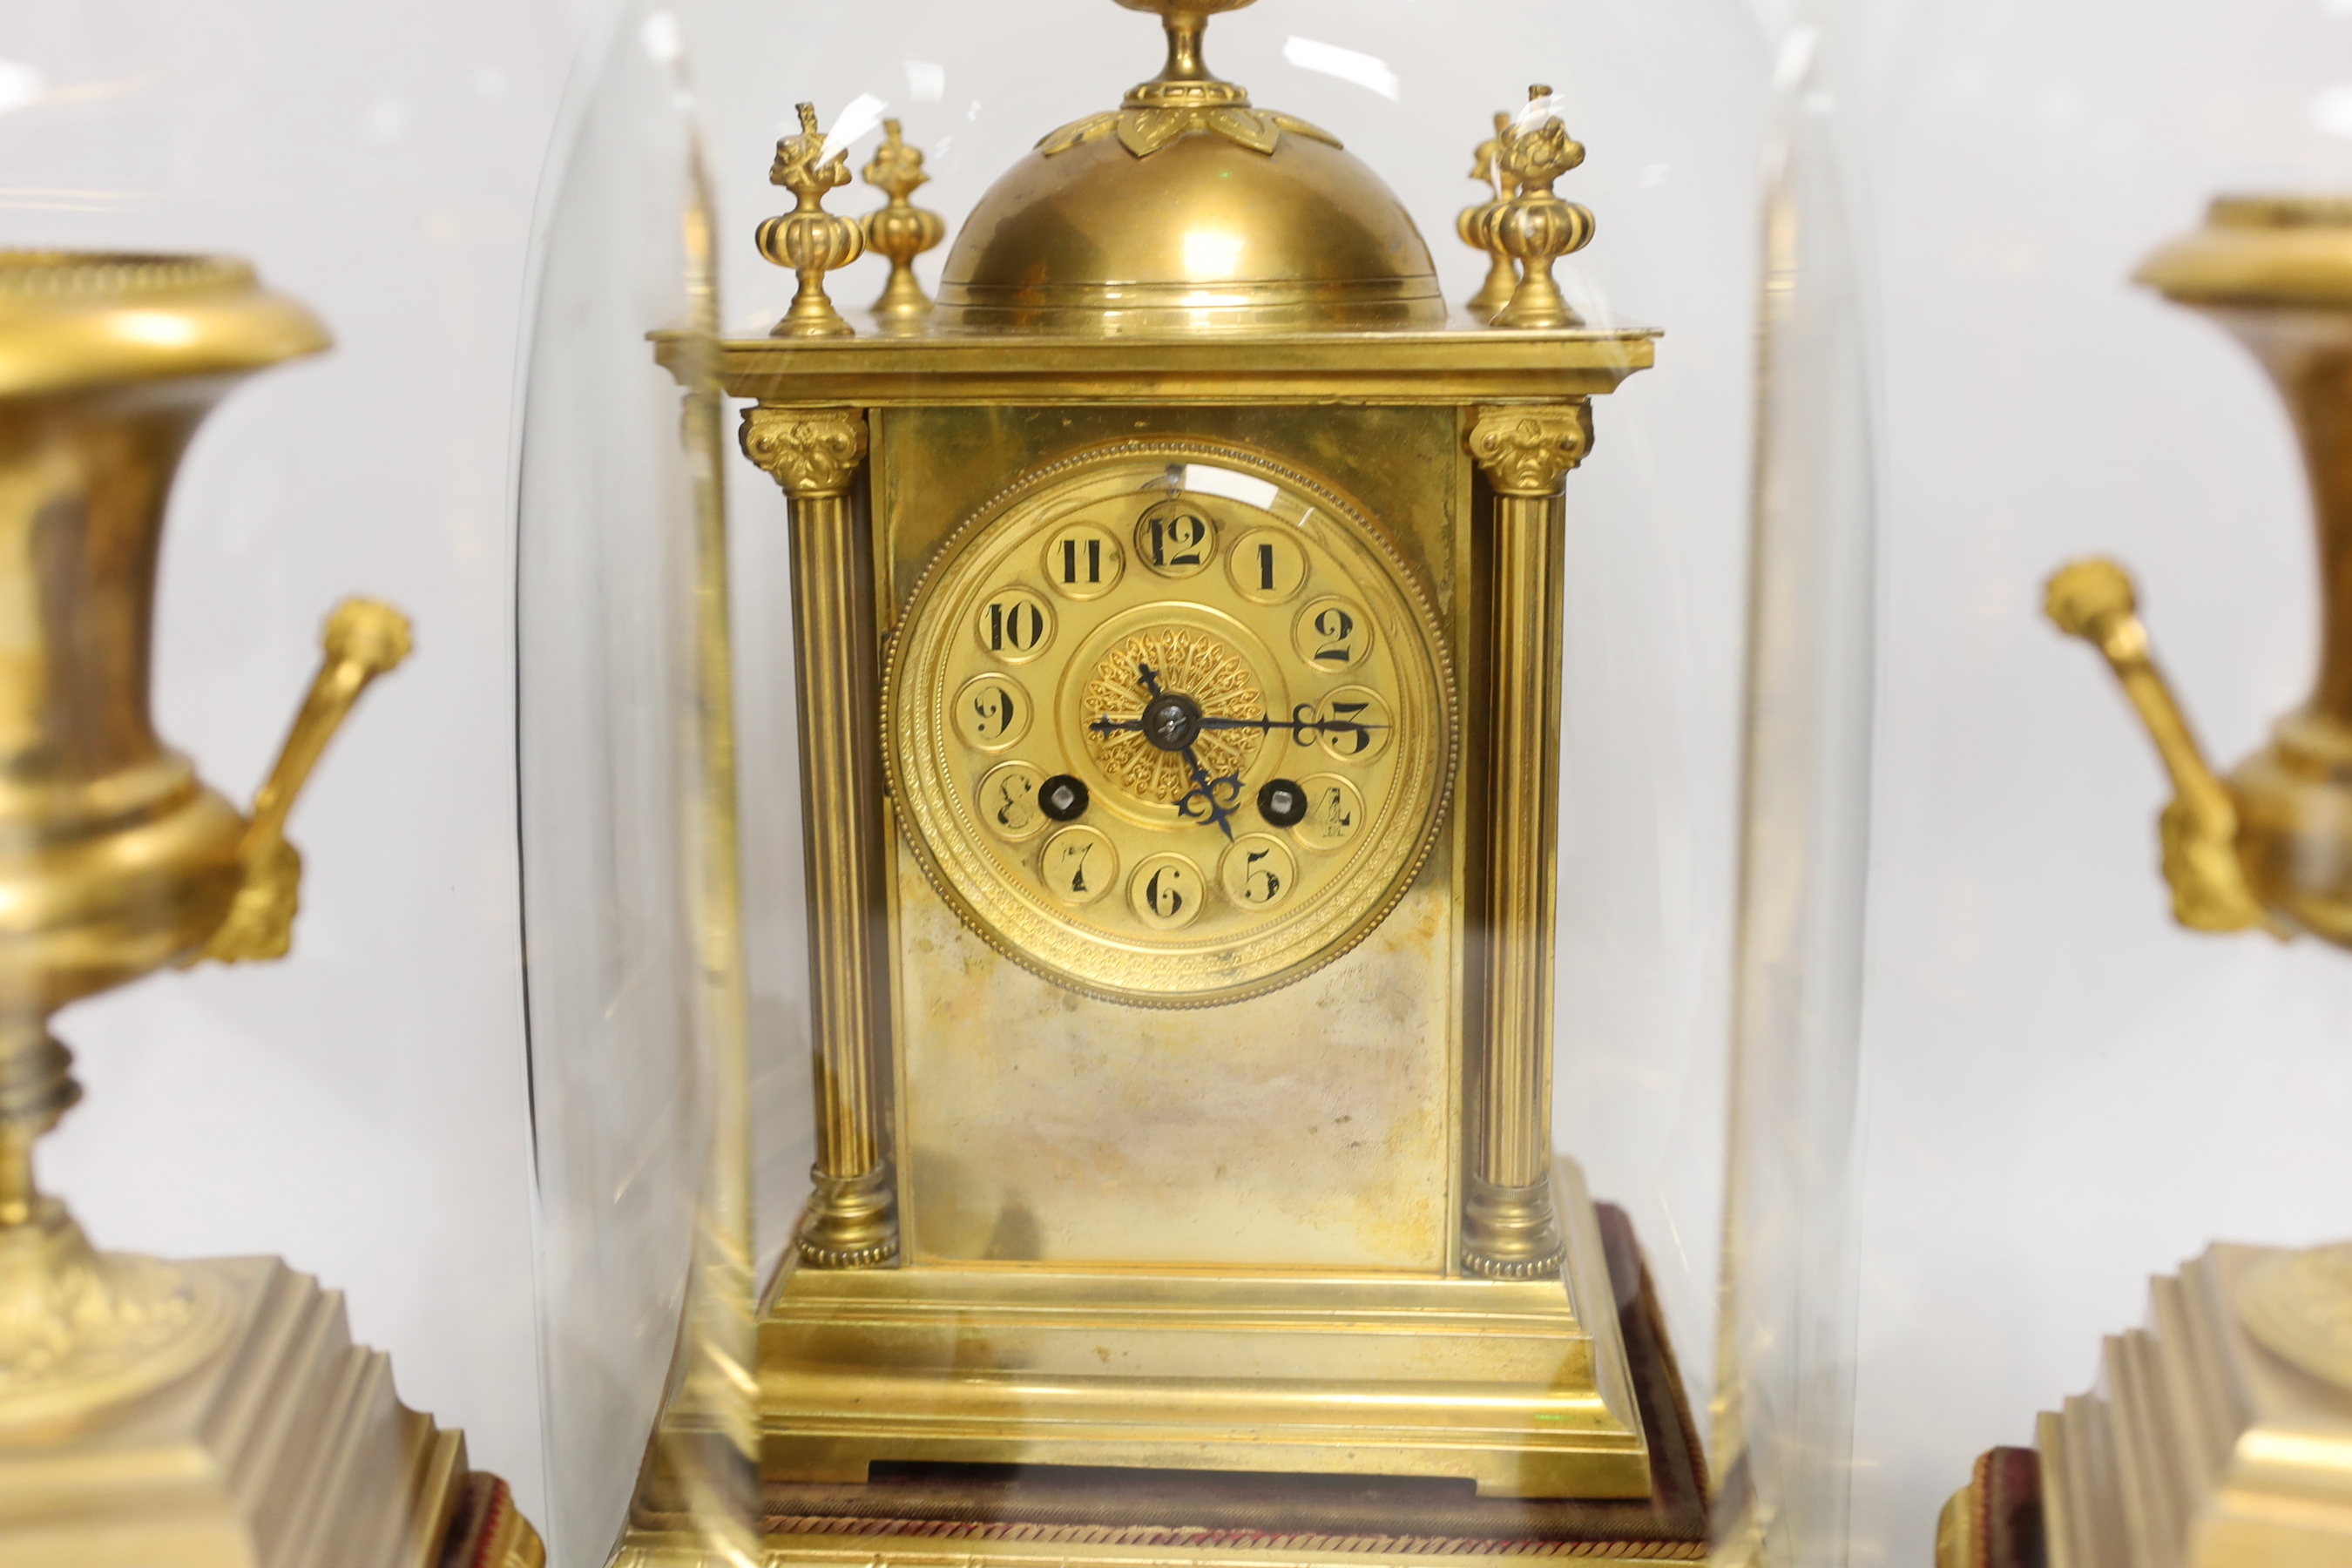 A gilt metal clock garniture, c.1900, with a pair of urns, all under glass domes, French movement by A D Mougin, striking on a gong, (missing base for clock dome), 36cm high